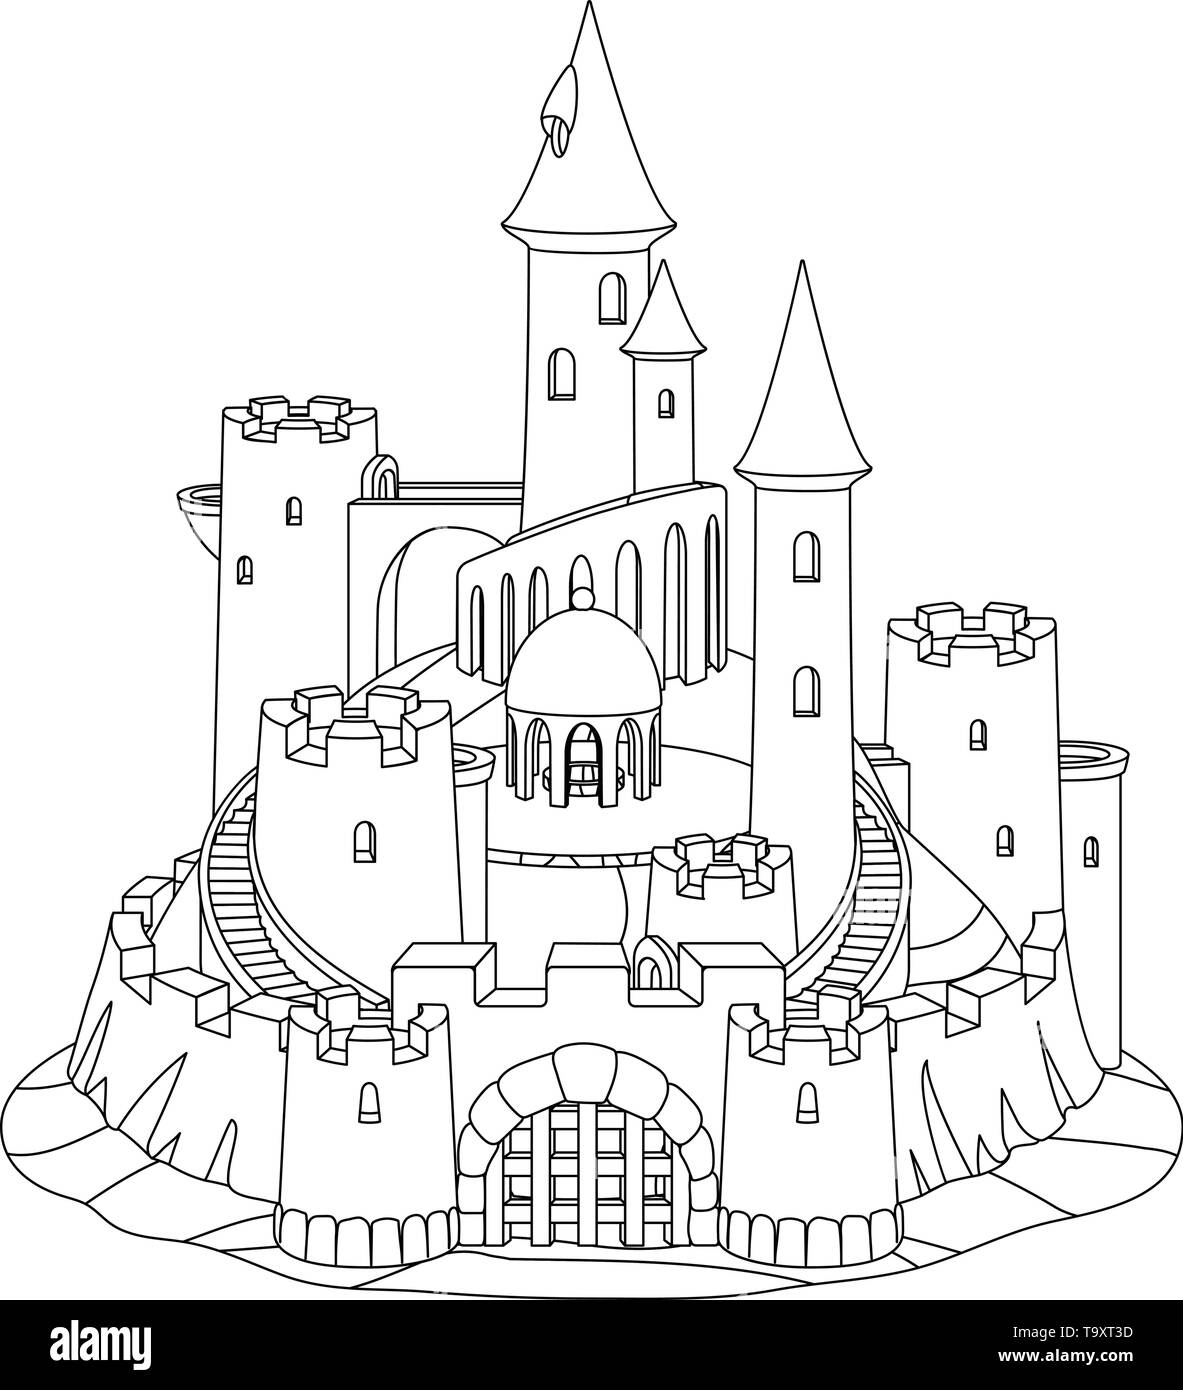 Easy Drawing Guides - Sand Castle Drawing Lesson. Free Online Drawing  Tutorial for Kids. Get the Free Printable Step by Step Drawing Instructions  on https://bit.ly/3IRBo6f . #SandCastle #LearnToDraw #ArtProject | Facebook